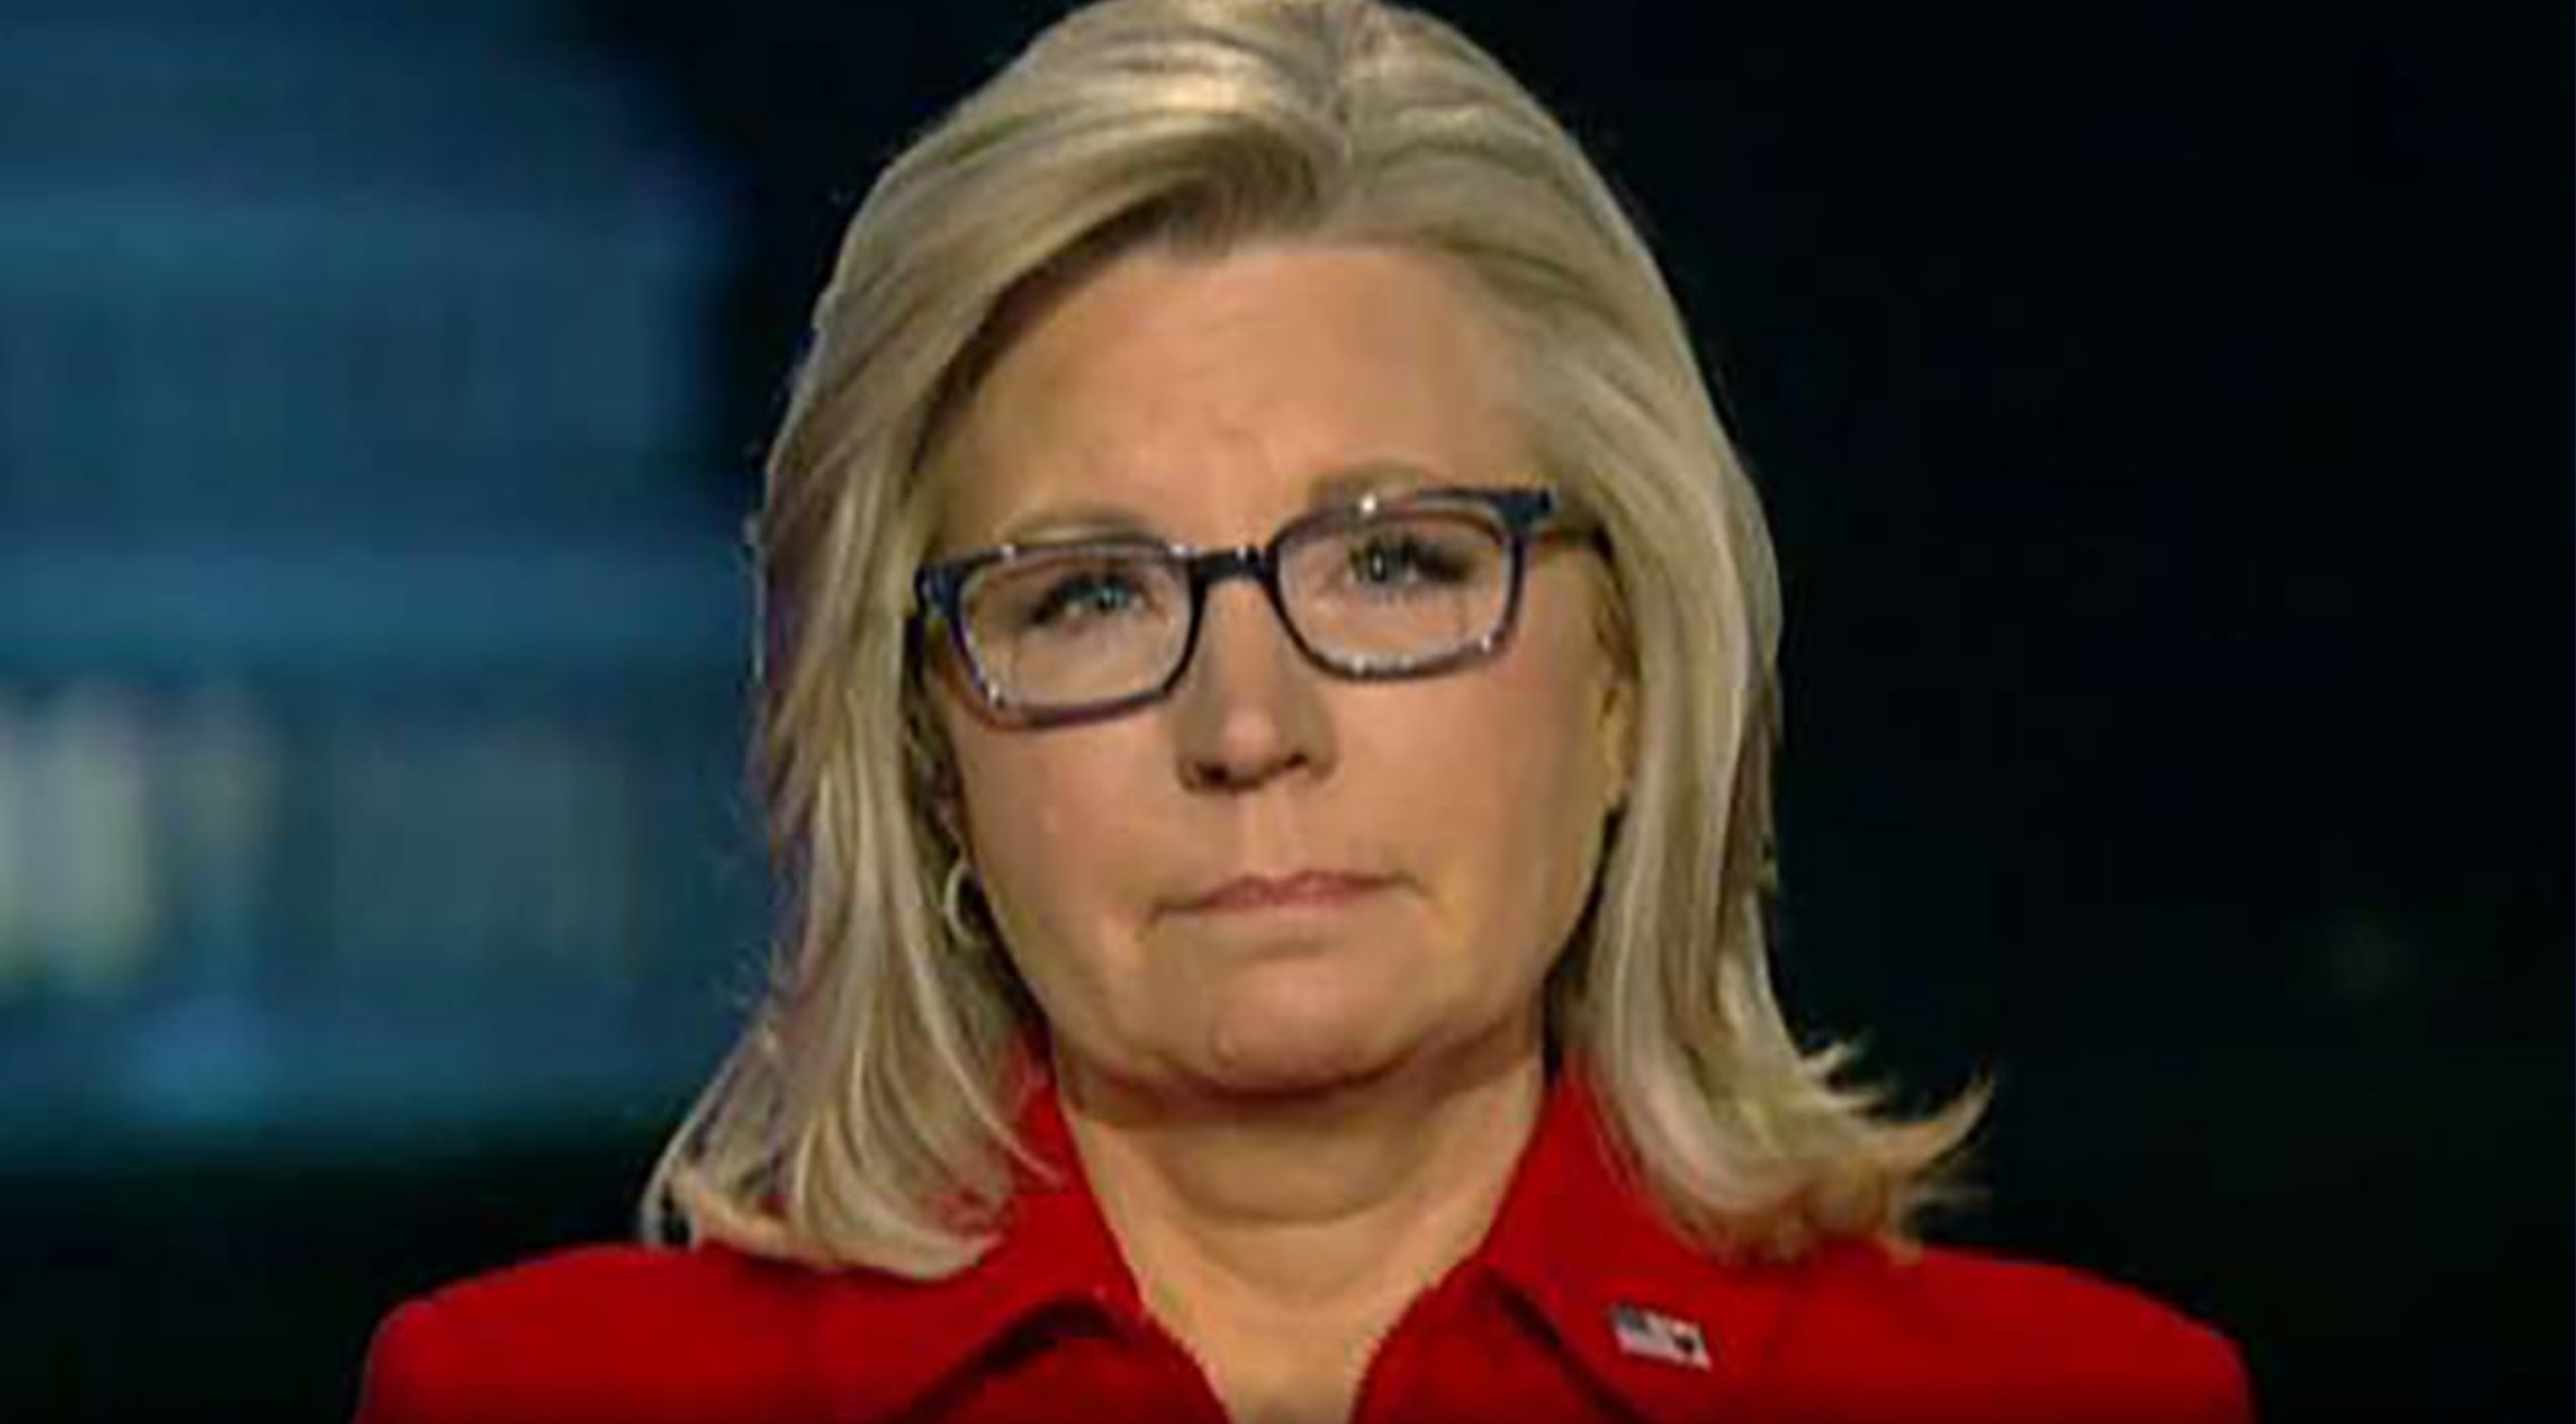 Liz Cheney Says Turkeys Timing Of Syria Action Was No Accident Amid Impeachment Push Fox News 1639